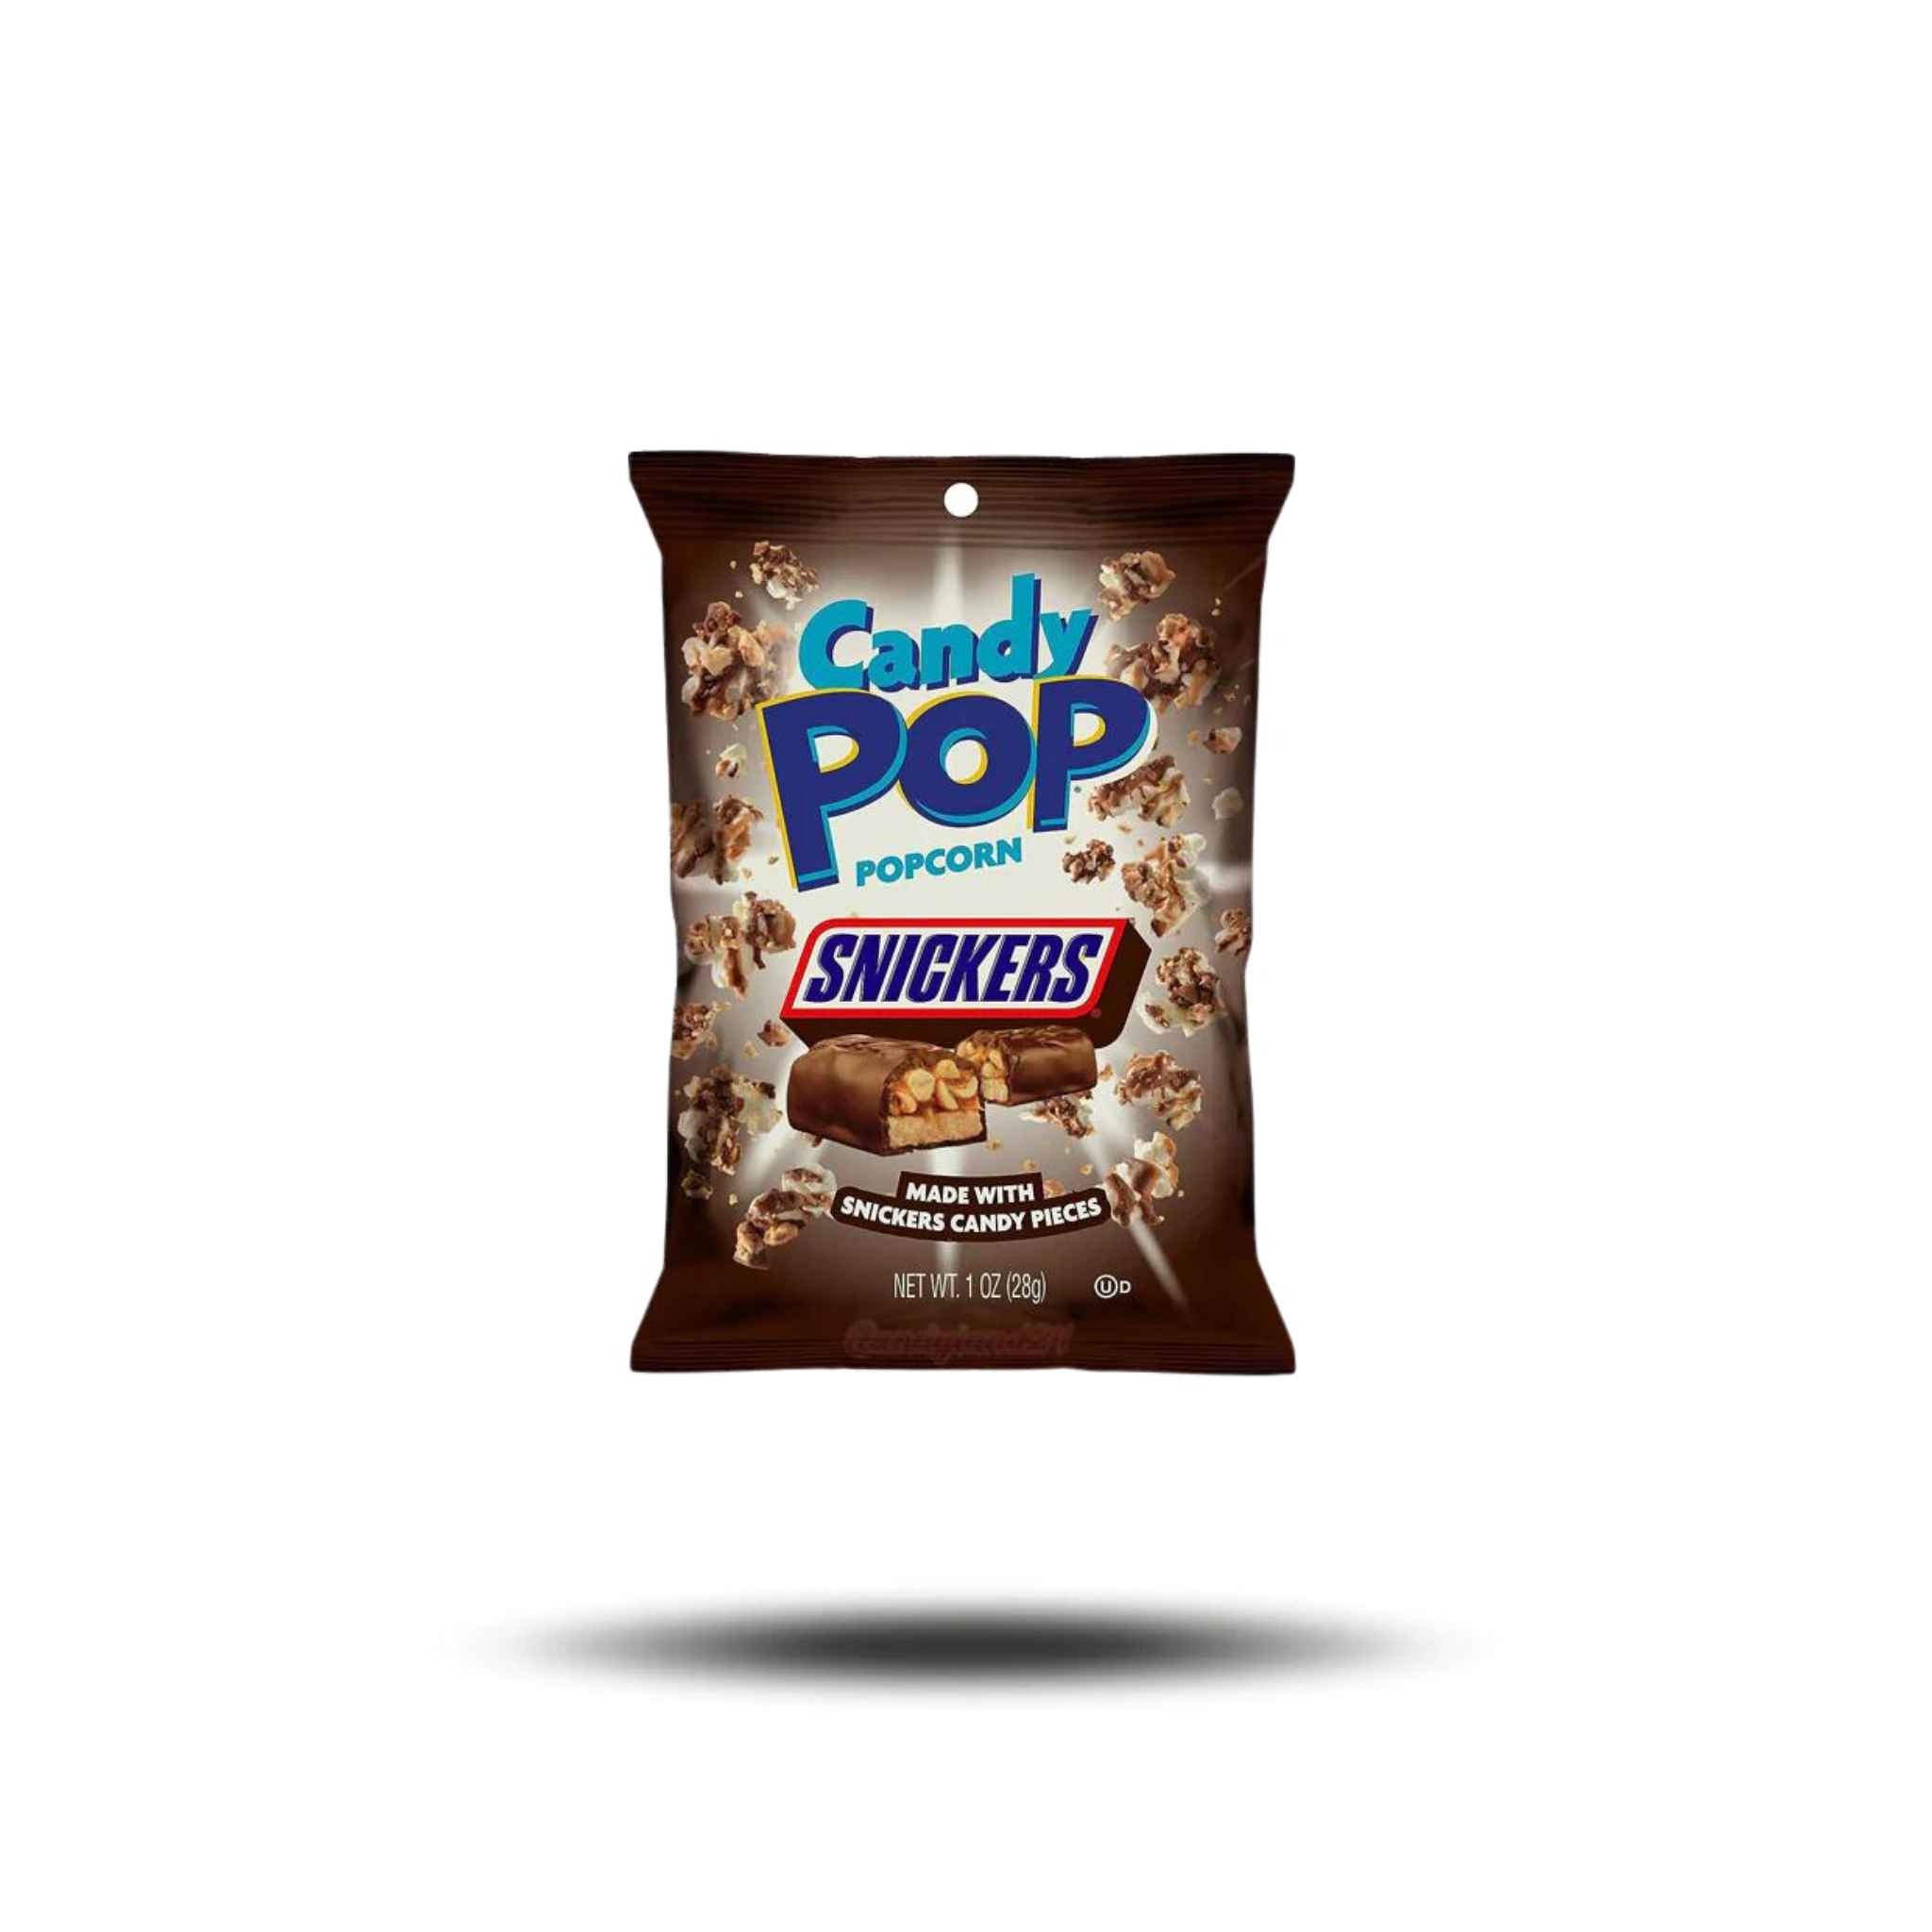 Candy Pop Popcorn Snickers (28g)